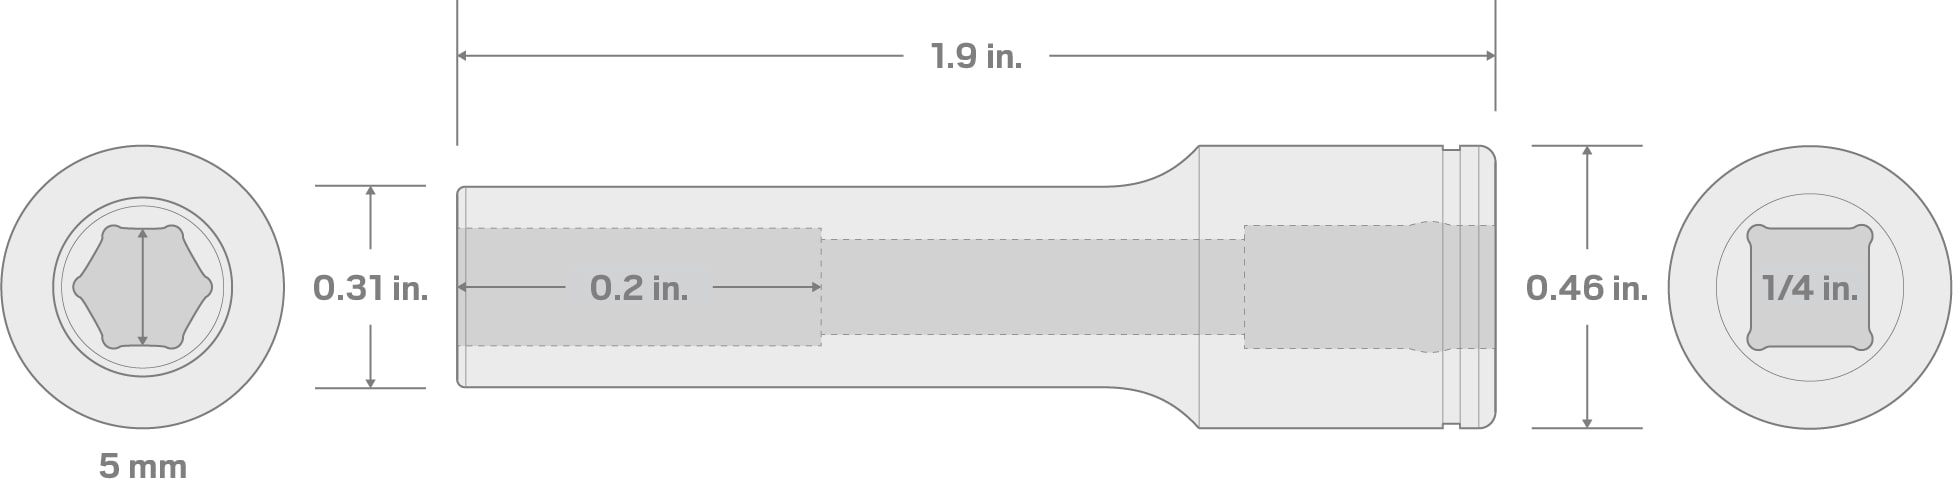 Specs for 1/4 Inch Drive x 5 mm Deep 6-Point Socket